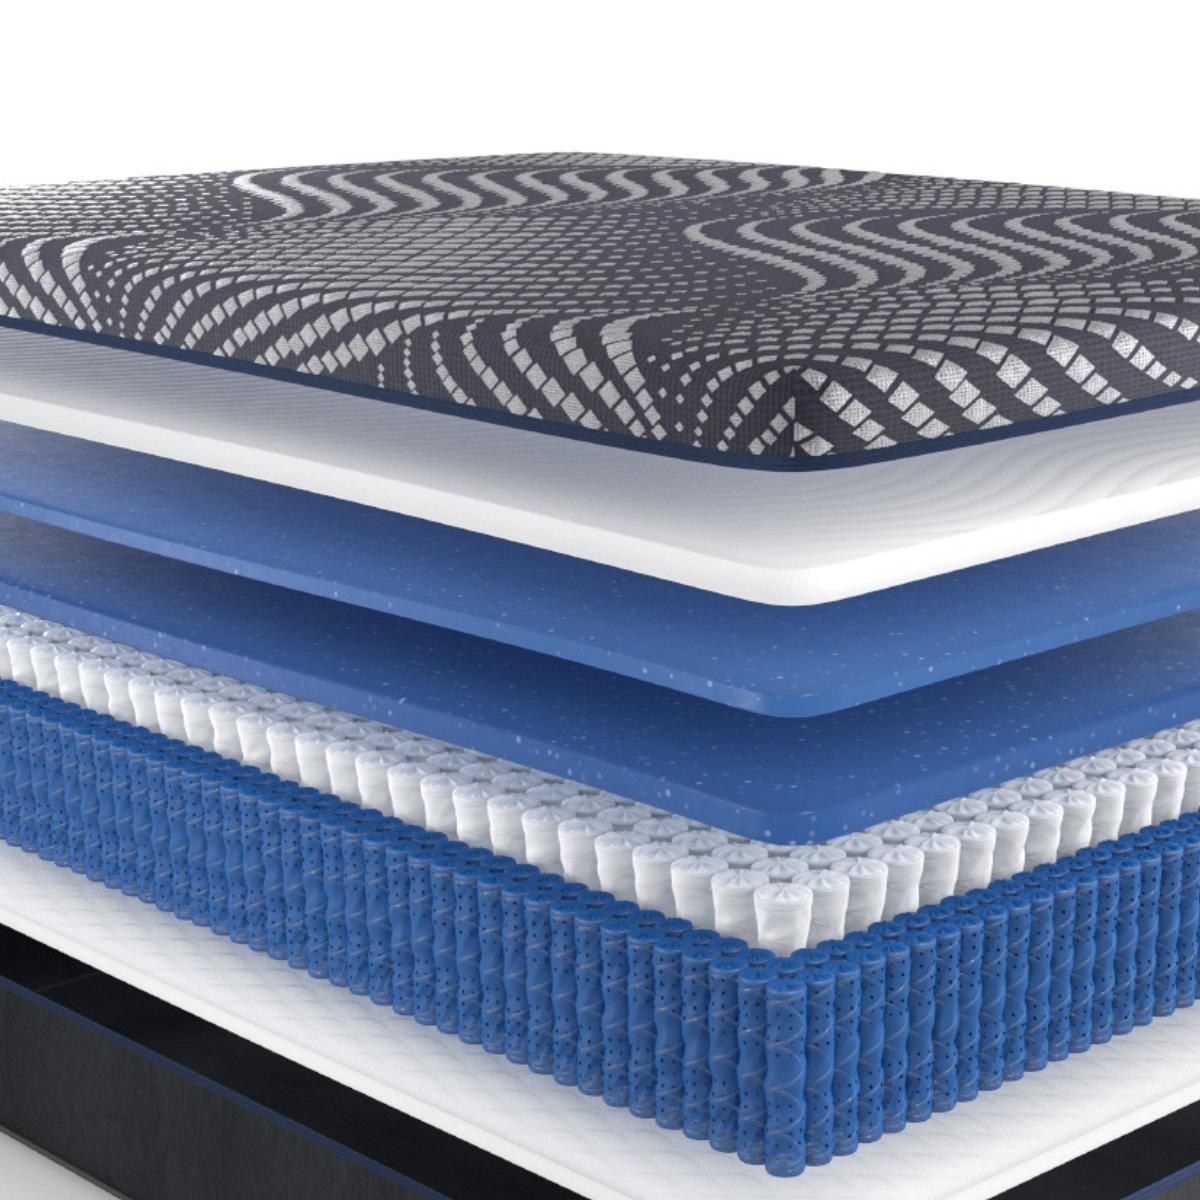 Hybrid Mattress Vs Traditional Mattress: Which is Right For YOU? - Mattress Xperts